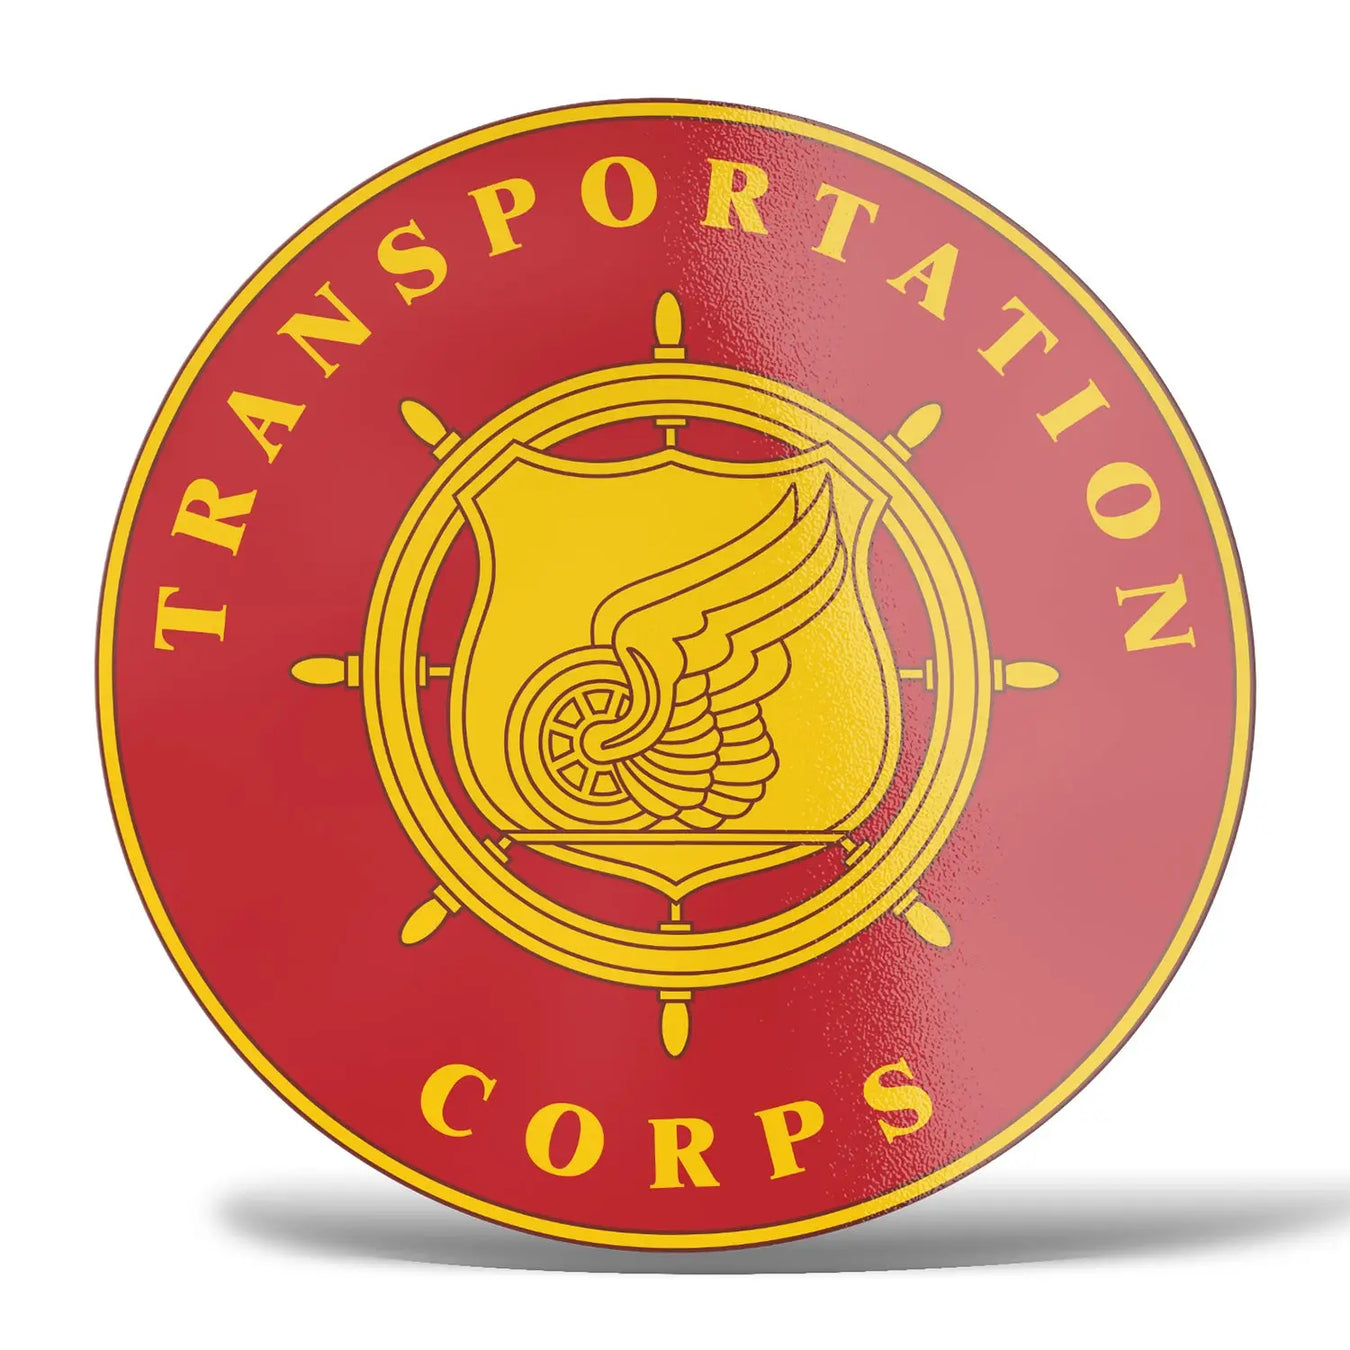 U.S. Army Transportation Corps Decals